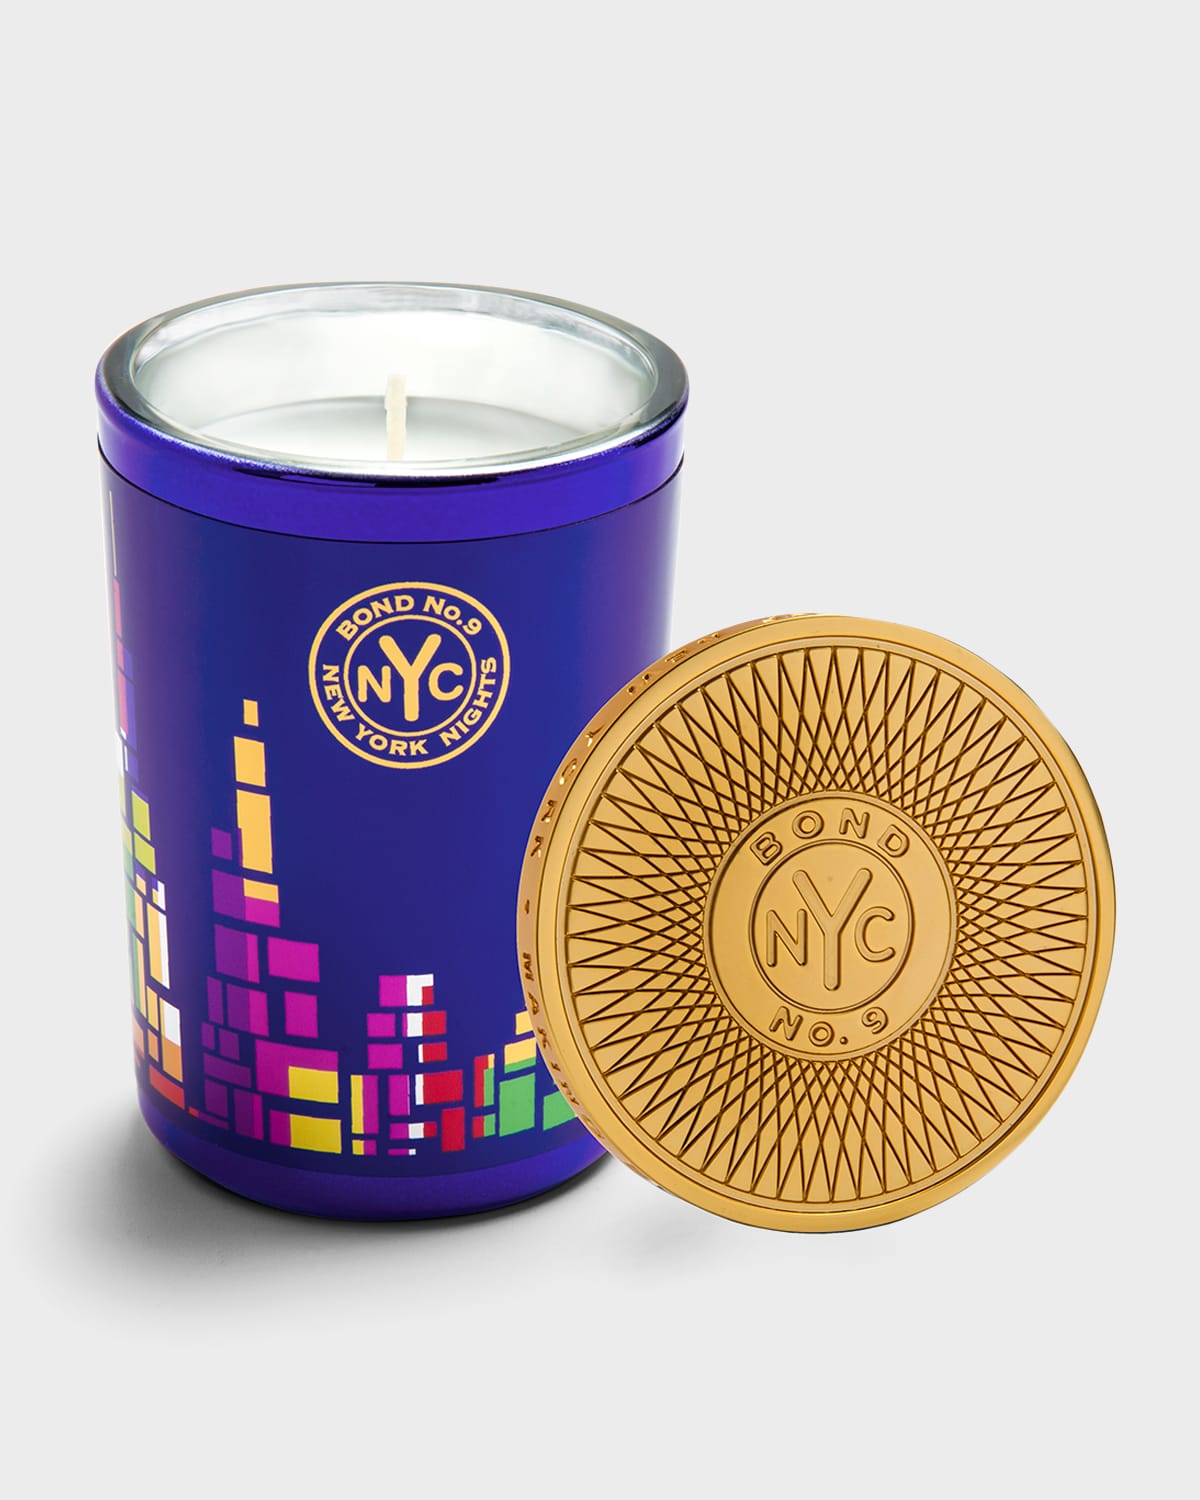 Bond No.9 New York 6.4 Oz. New York Nights Scented Candle